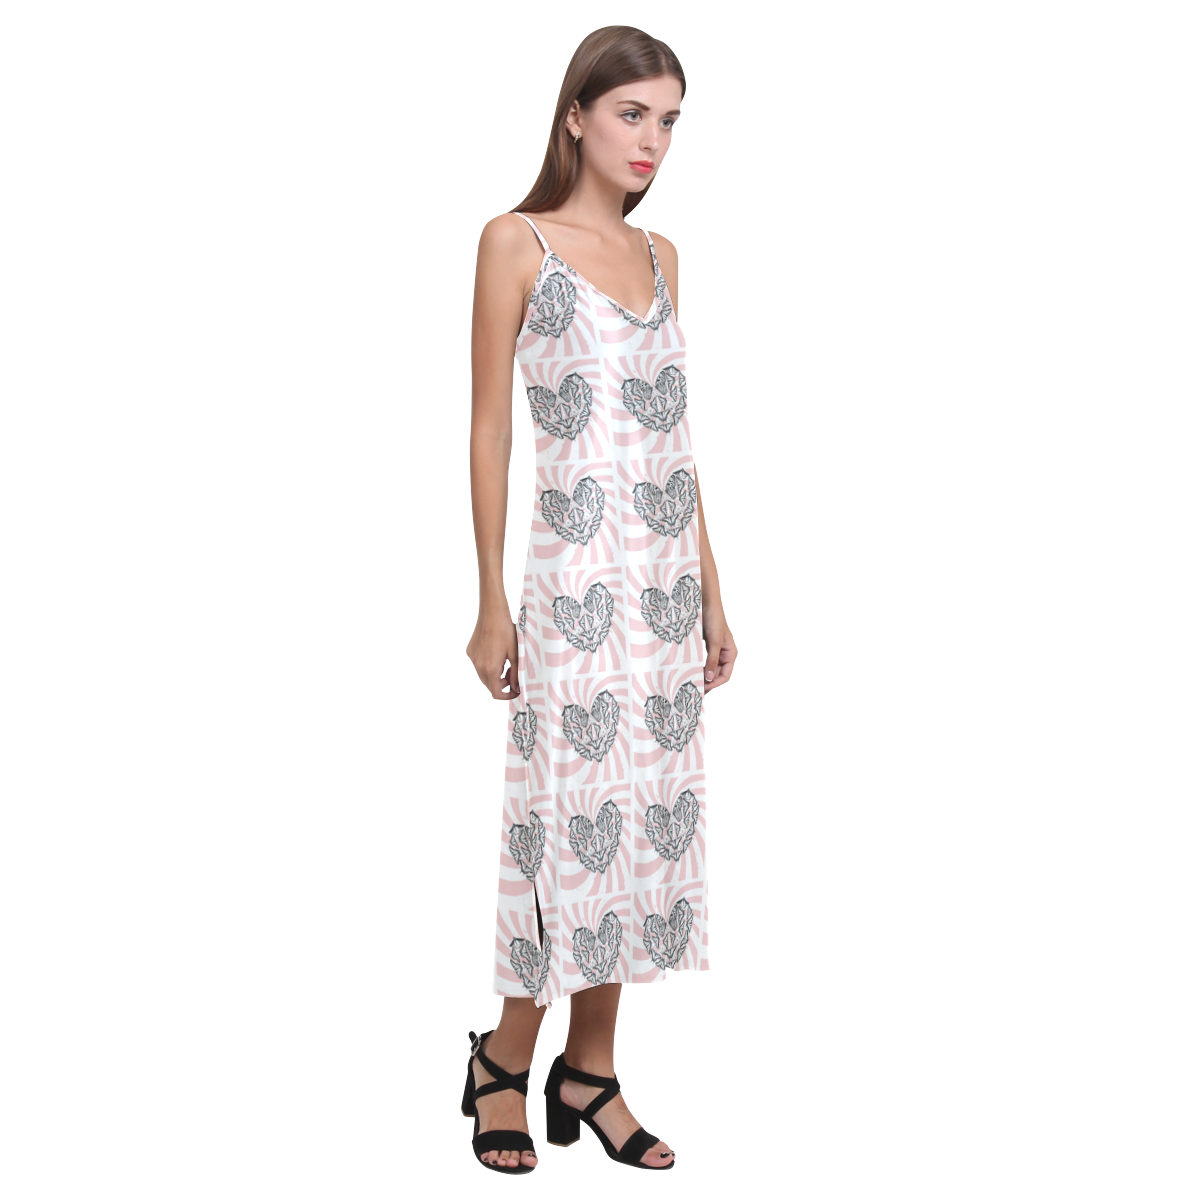 Love Conquers Hate Pattern V-Neck Open Fork Dress V-Neck Open Fork Long Dress(Model D18)